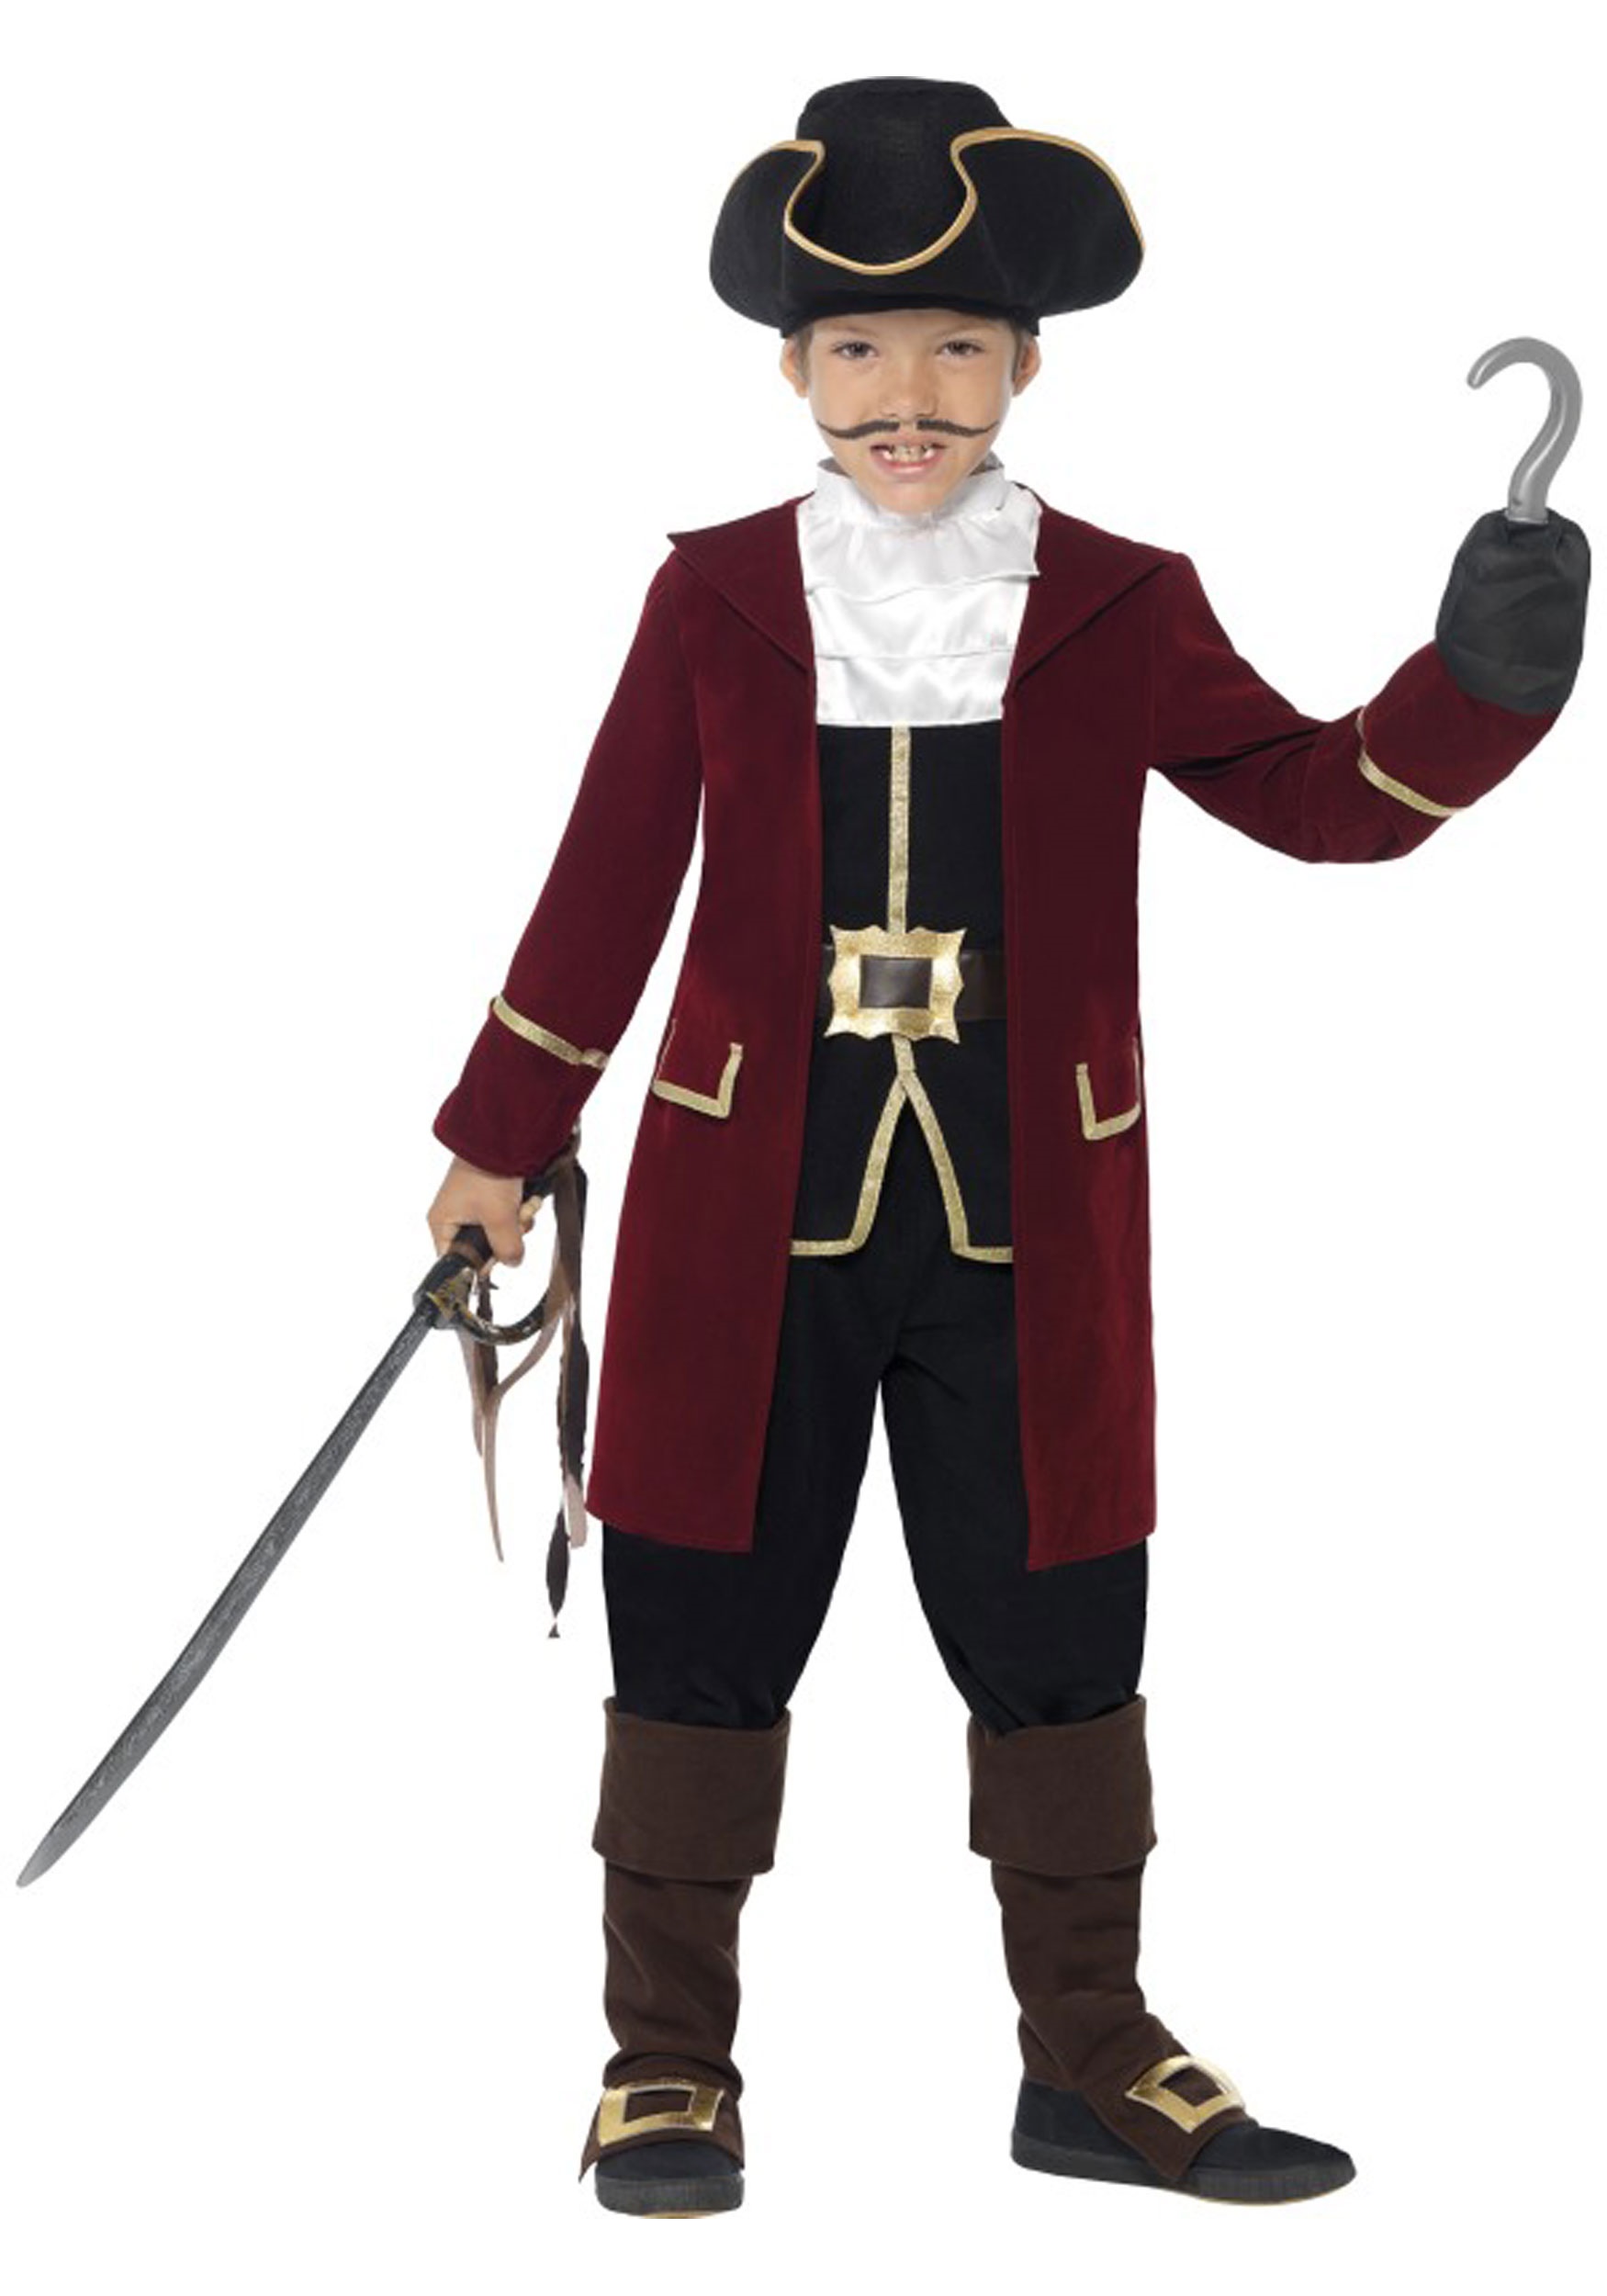 https://images.halloweencostumes.com/products/42168/1-1/boys-deluxe-captain-hook-costume.jpg